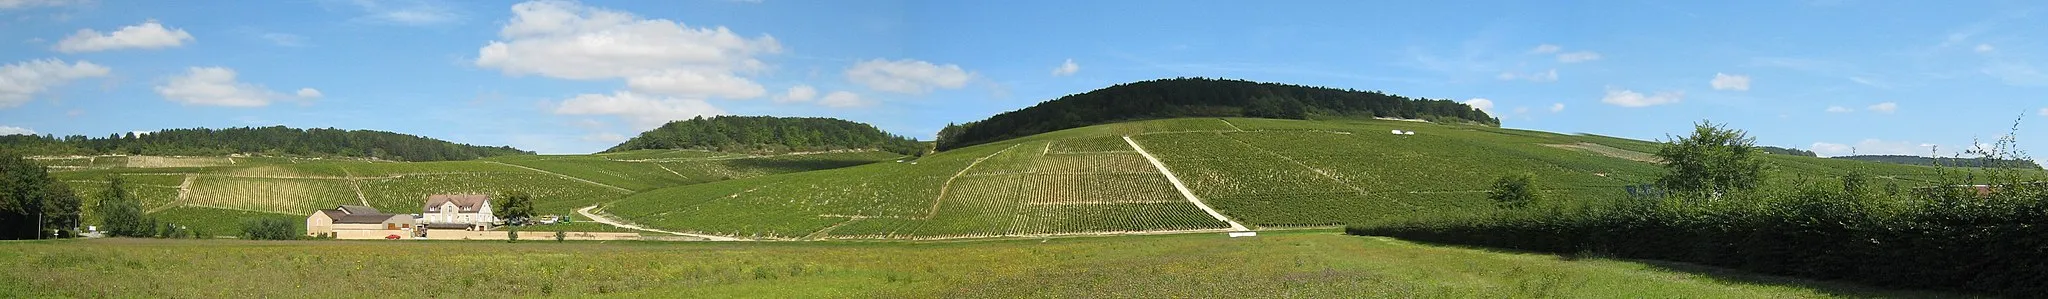 Photo showing: The Grand Cru vineyards north of Chablis, Burgundy. From left to right - Bougros, Les Preuses, Vaudésir, Grenouilles around the house, Valmur, Les Clos, Blanchots and in the far distance across the Vallée de Brechain, the Premier Cru of Montée de Tonnerre. Three photos stitched together.